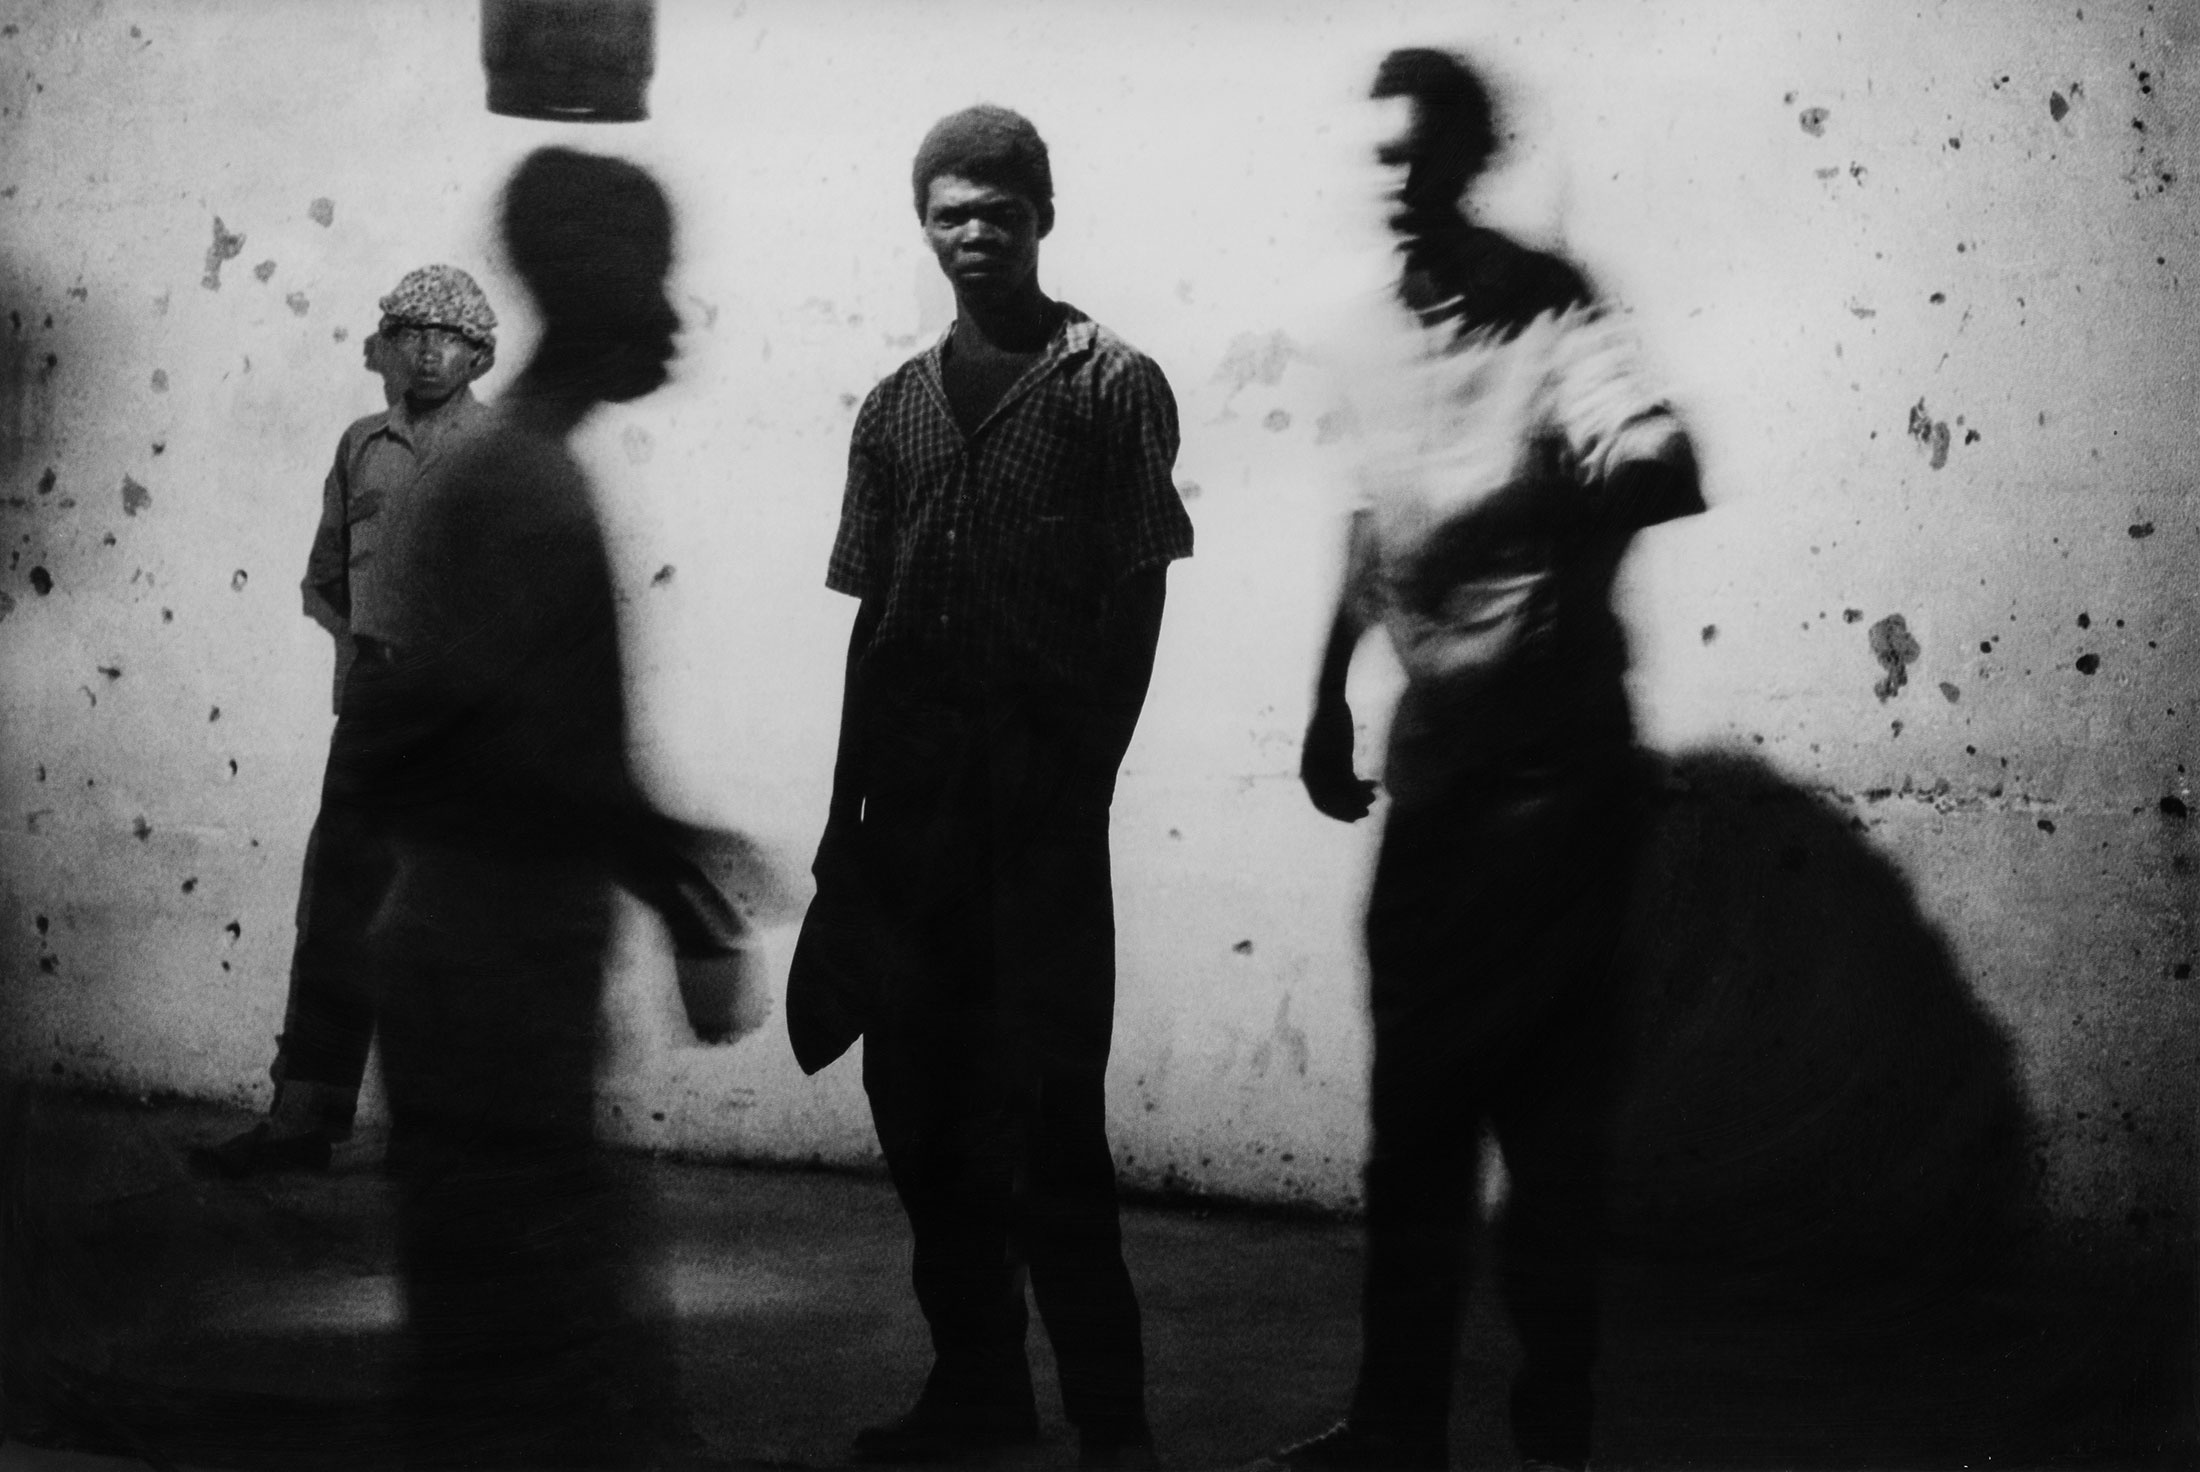 Santu Mofokeng’s monochrome photograph ‘Concert at Sewefontein, Bloemhof’ depicts four individuals standing in front of a wall.
